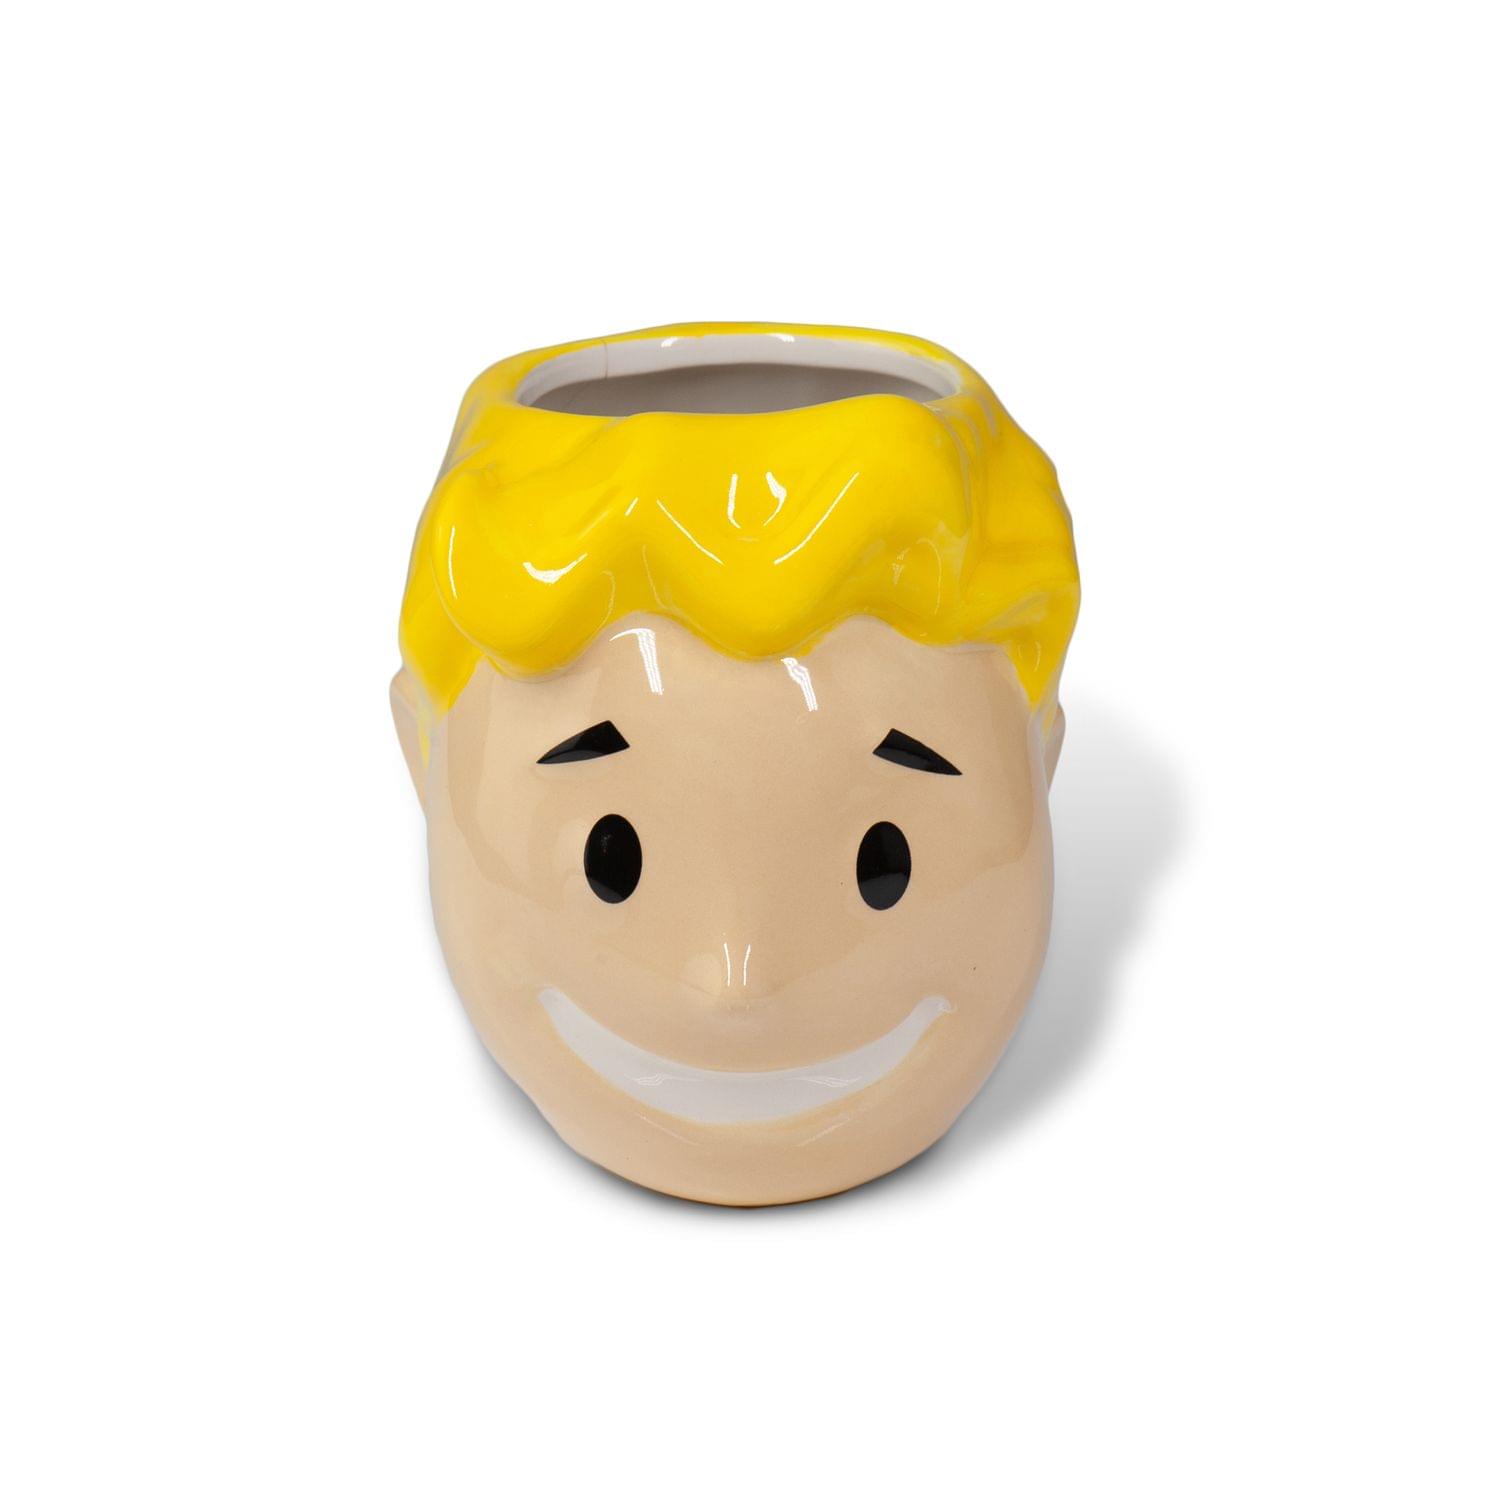 Fallout Vault Boy Ceramic Mug | Official Fallout Drinking Cup | Holds 24 Ounces